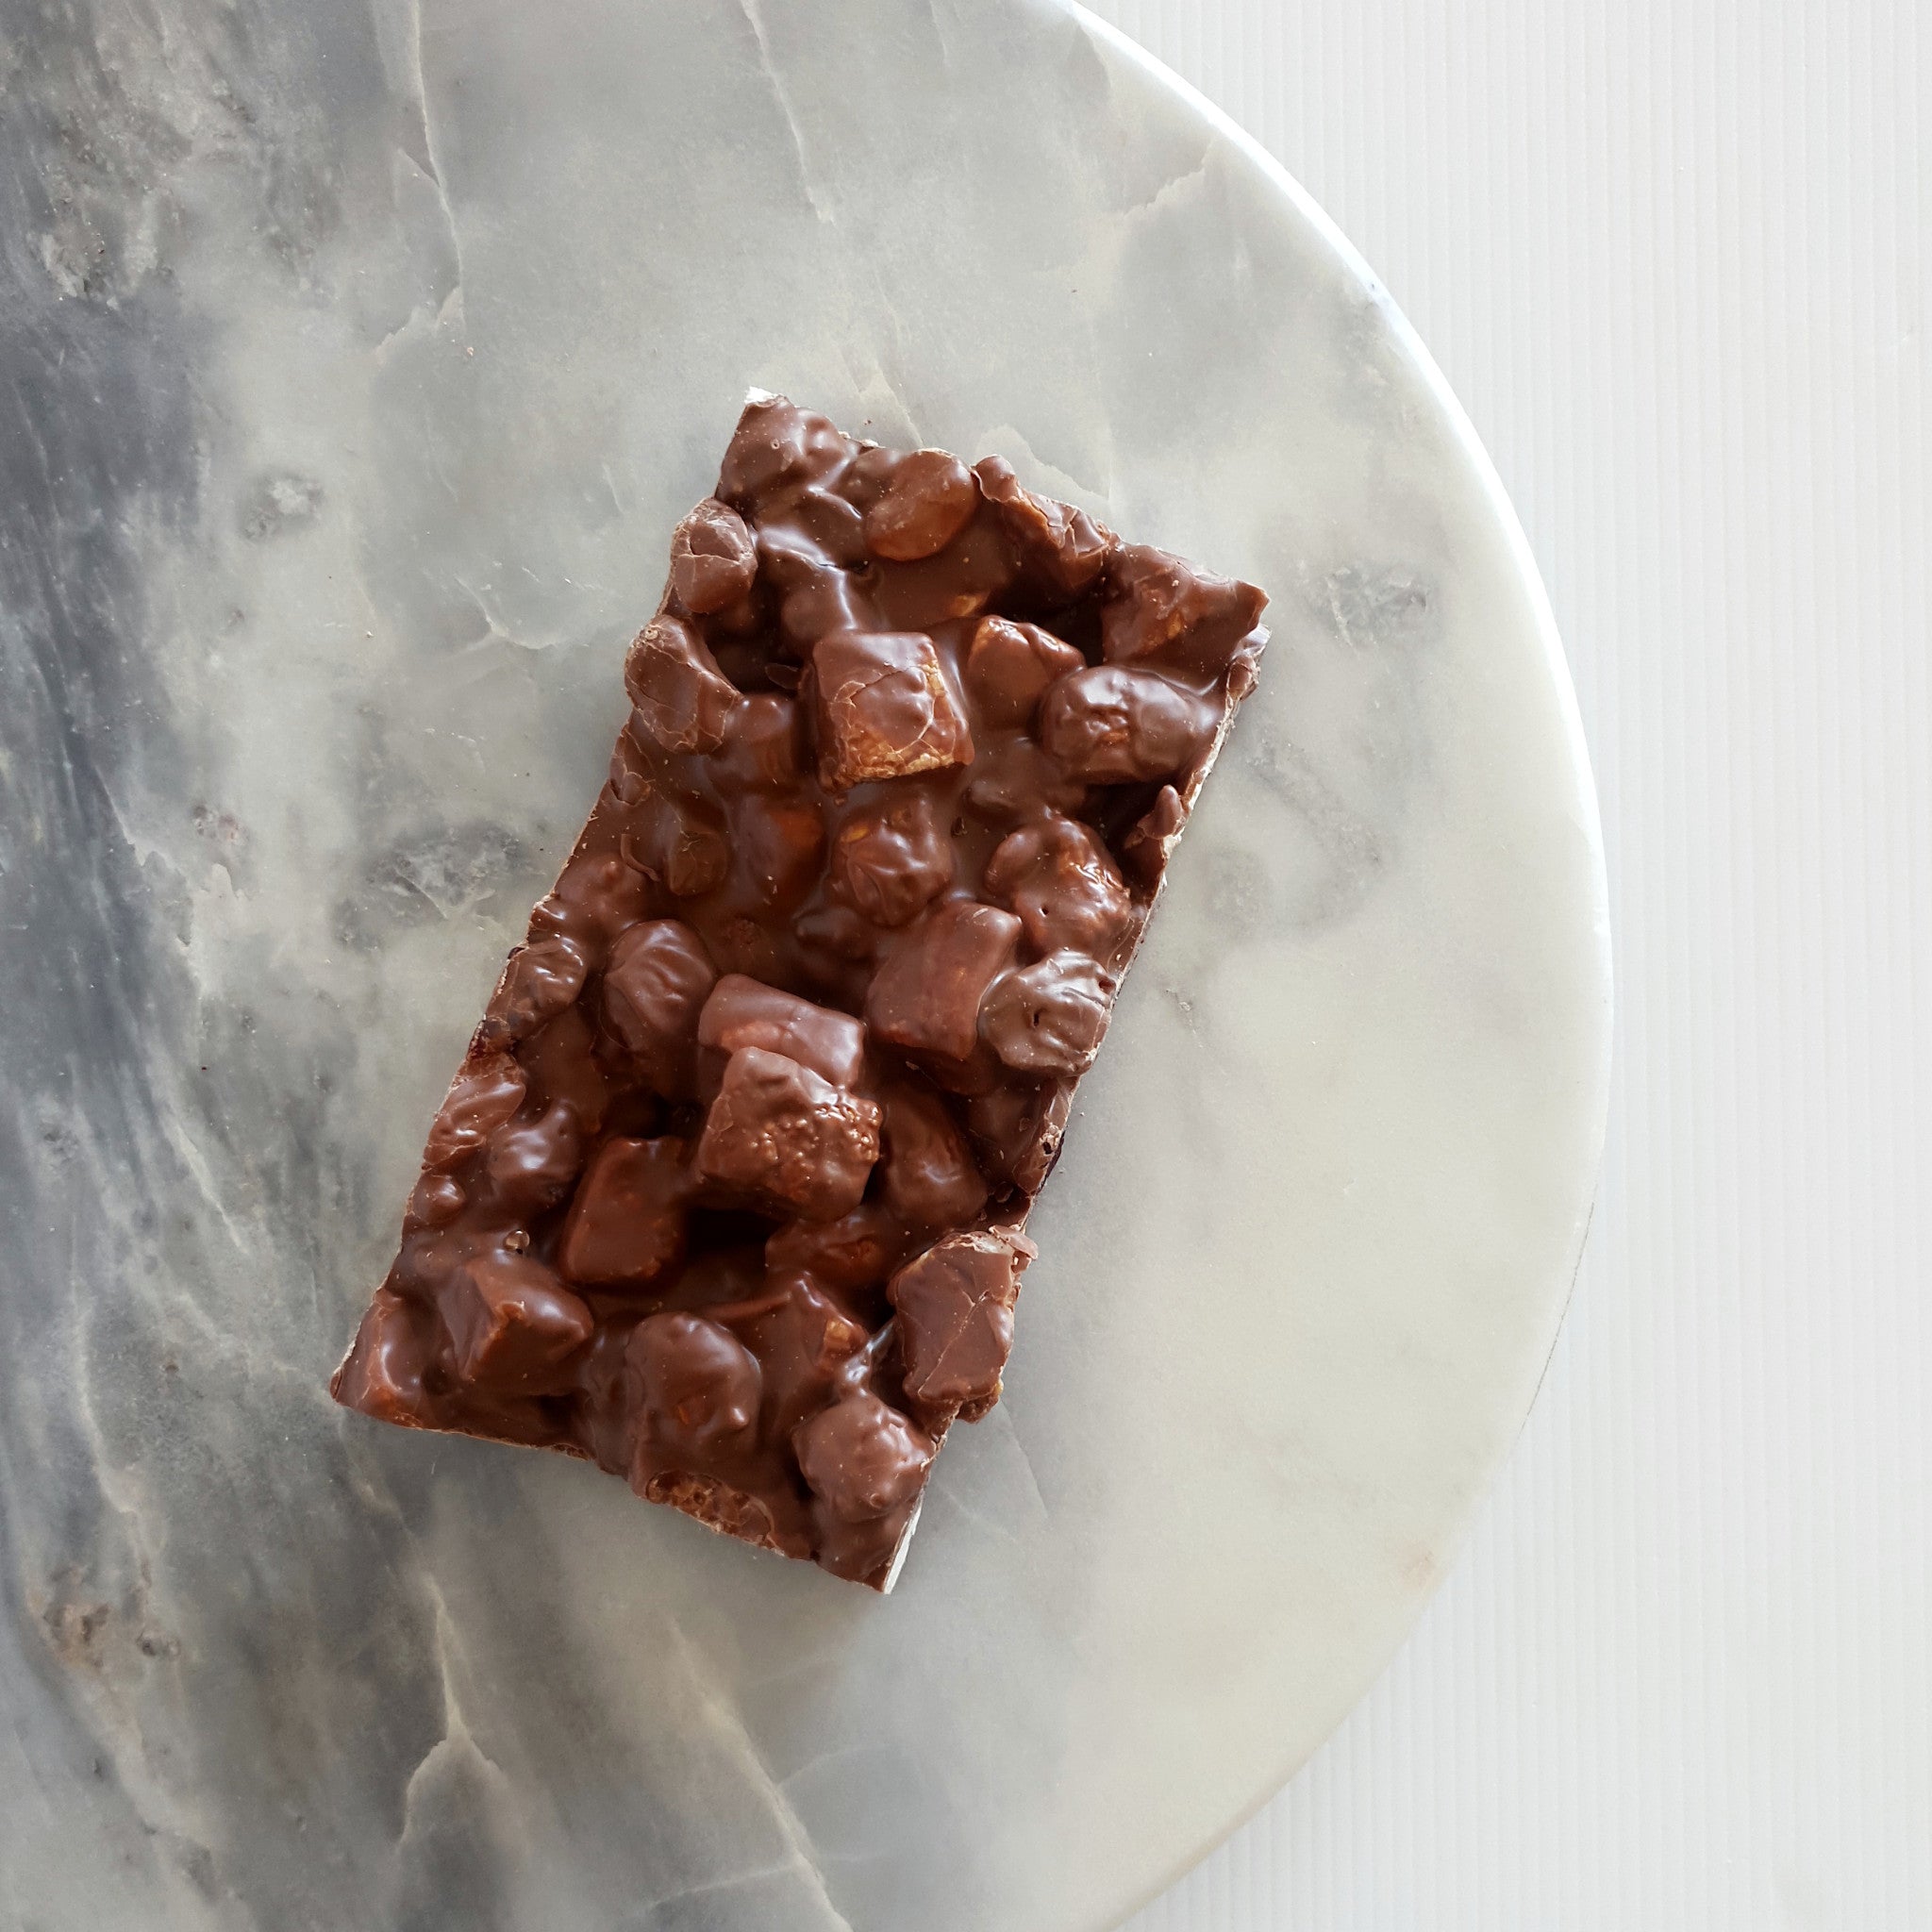 Handmade rocky road made with Callebaut Belgian couverture chocolate. Contains vanilla marshmallow, caramelised almonds, pistachio and hazelnut, Turkish delight pieces and dried cranberries. Made on the south coast of NSW in the picturesque town of Milton by Woodstock Chocolate Co.